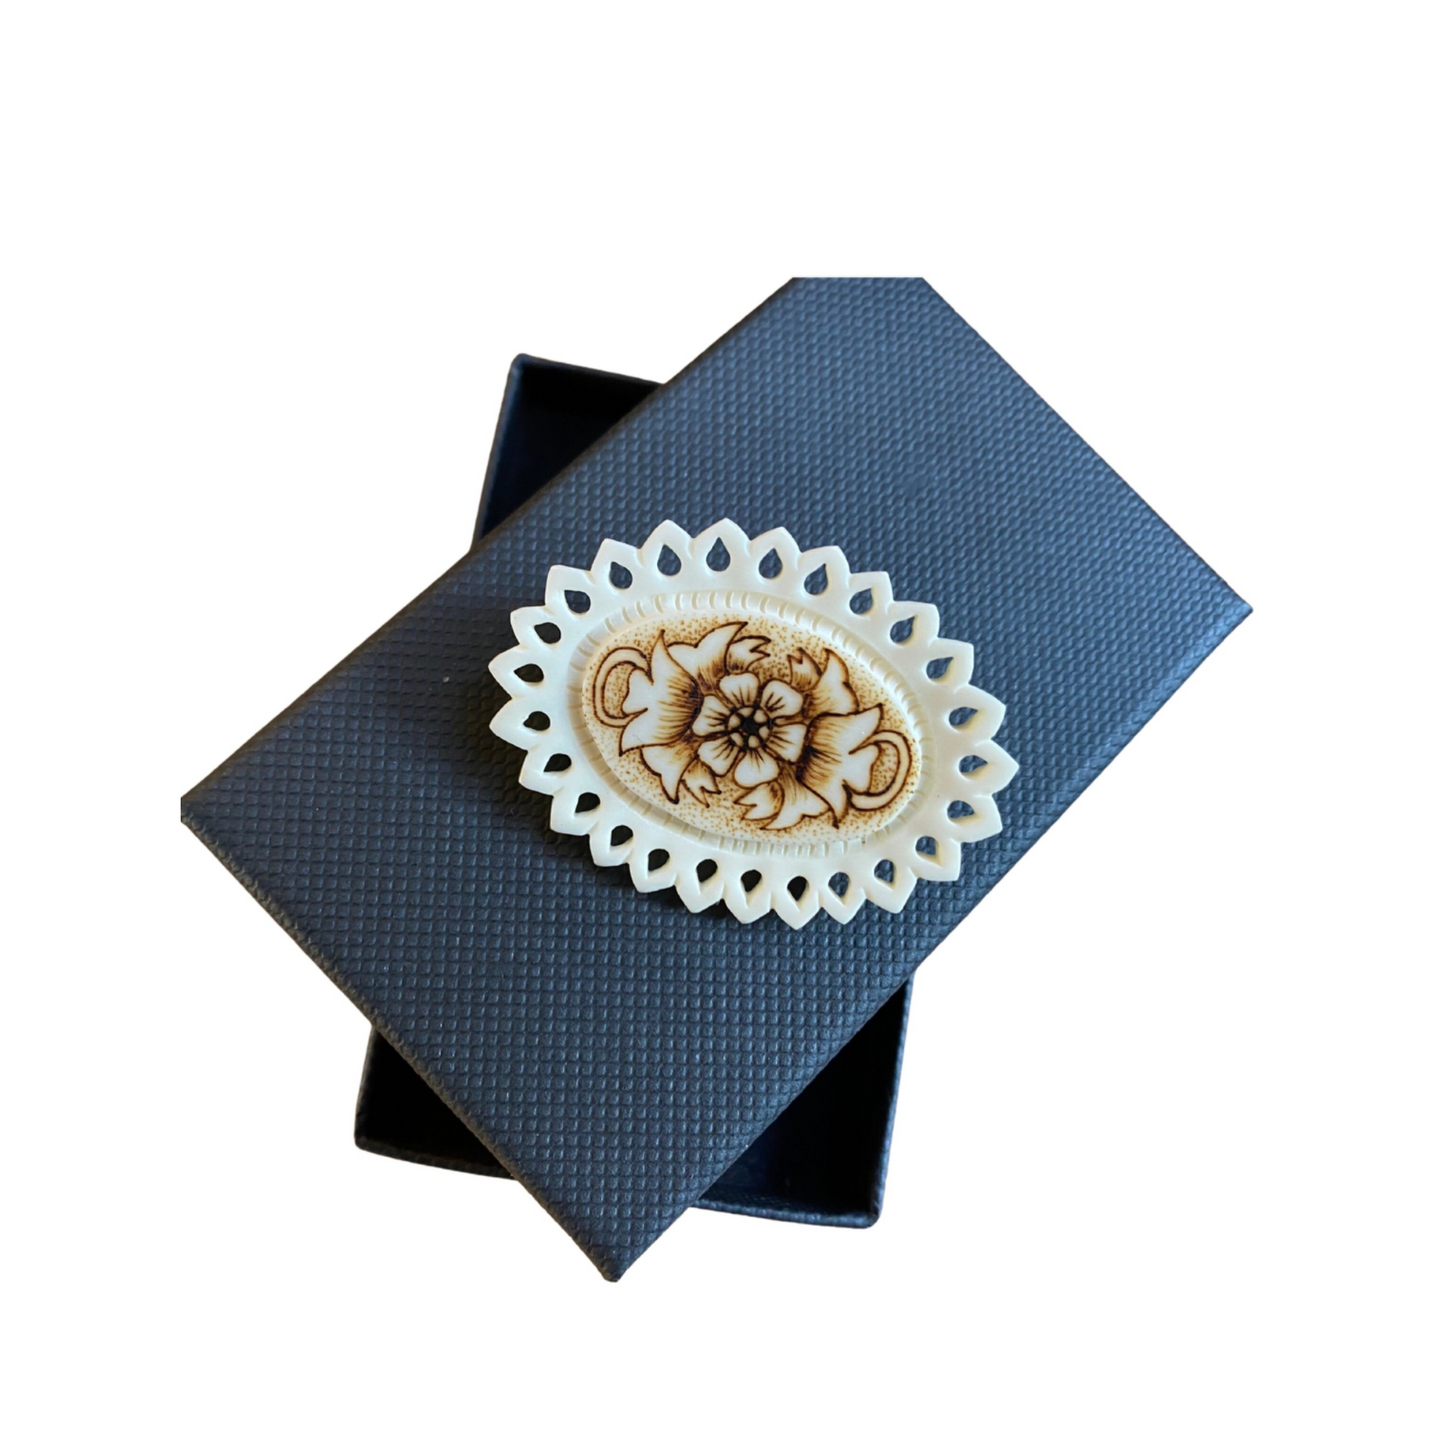 Gift-worthy cream brooch with intricate floral pattern